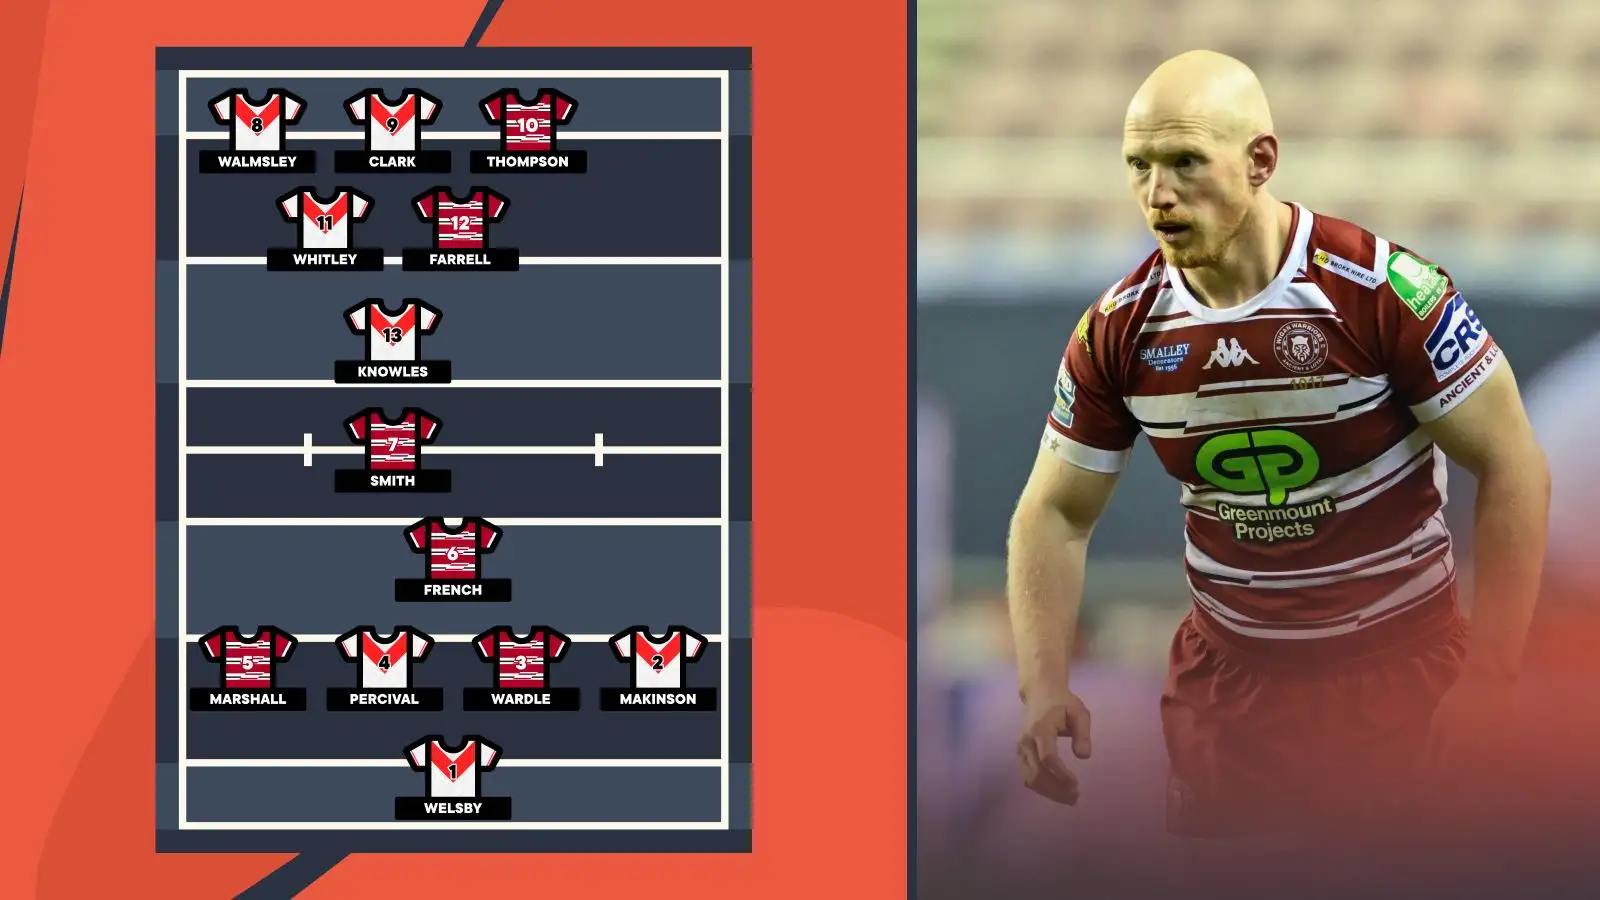 An outrageously good combined XIII of St Helens and Wigan Warriors stars